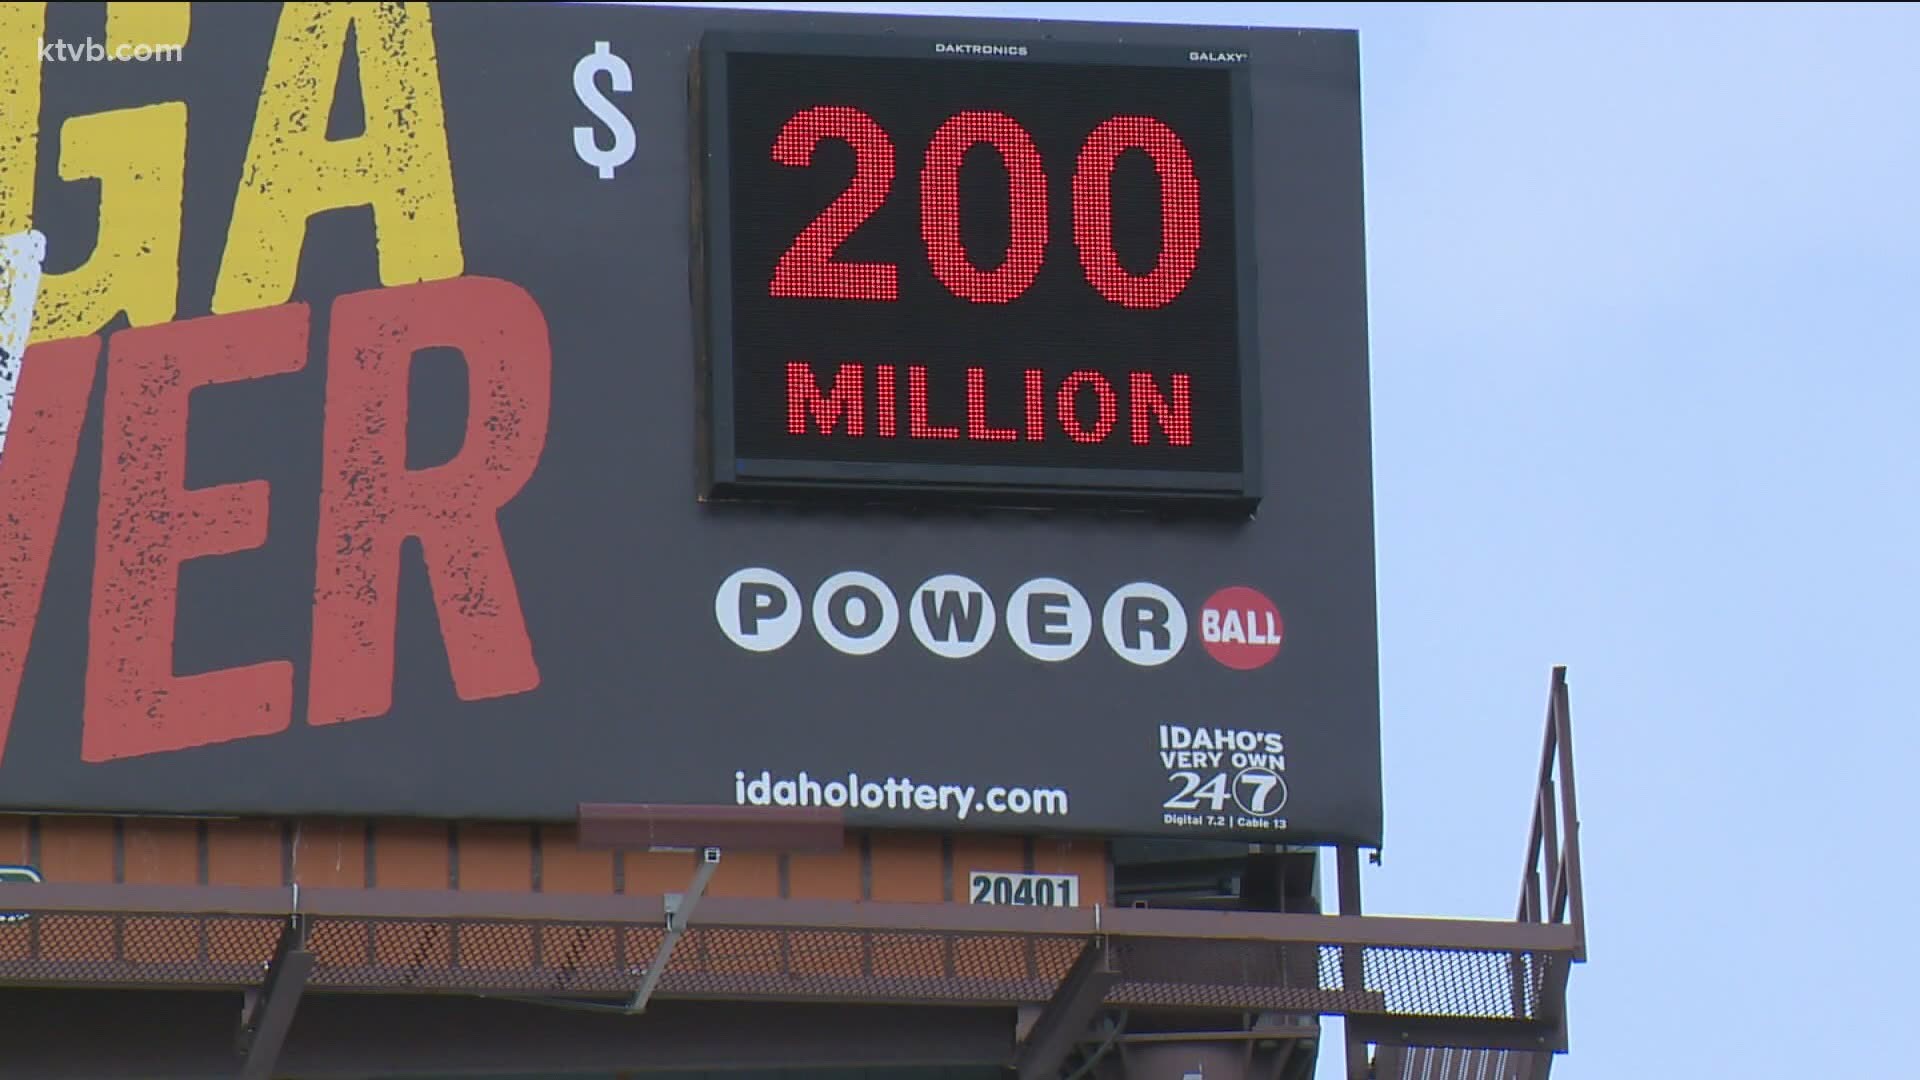 Idaho Lottery officials say the changes are being made to create larger jackpots for Powerball players.